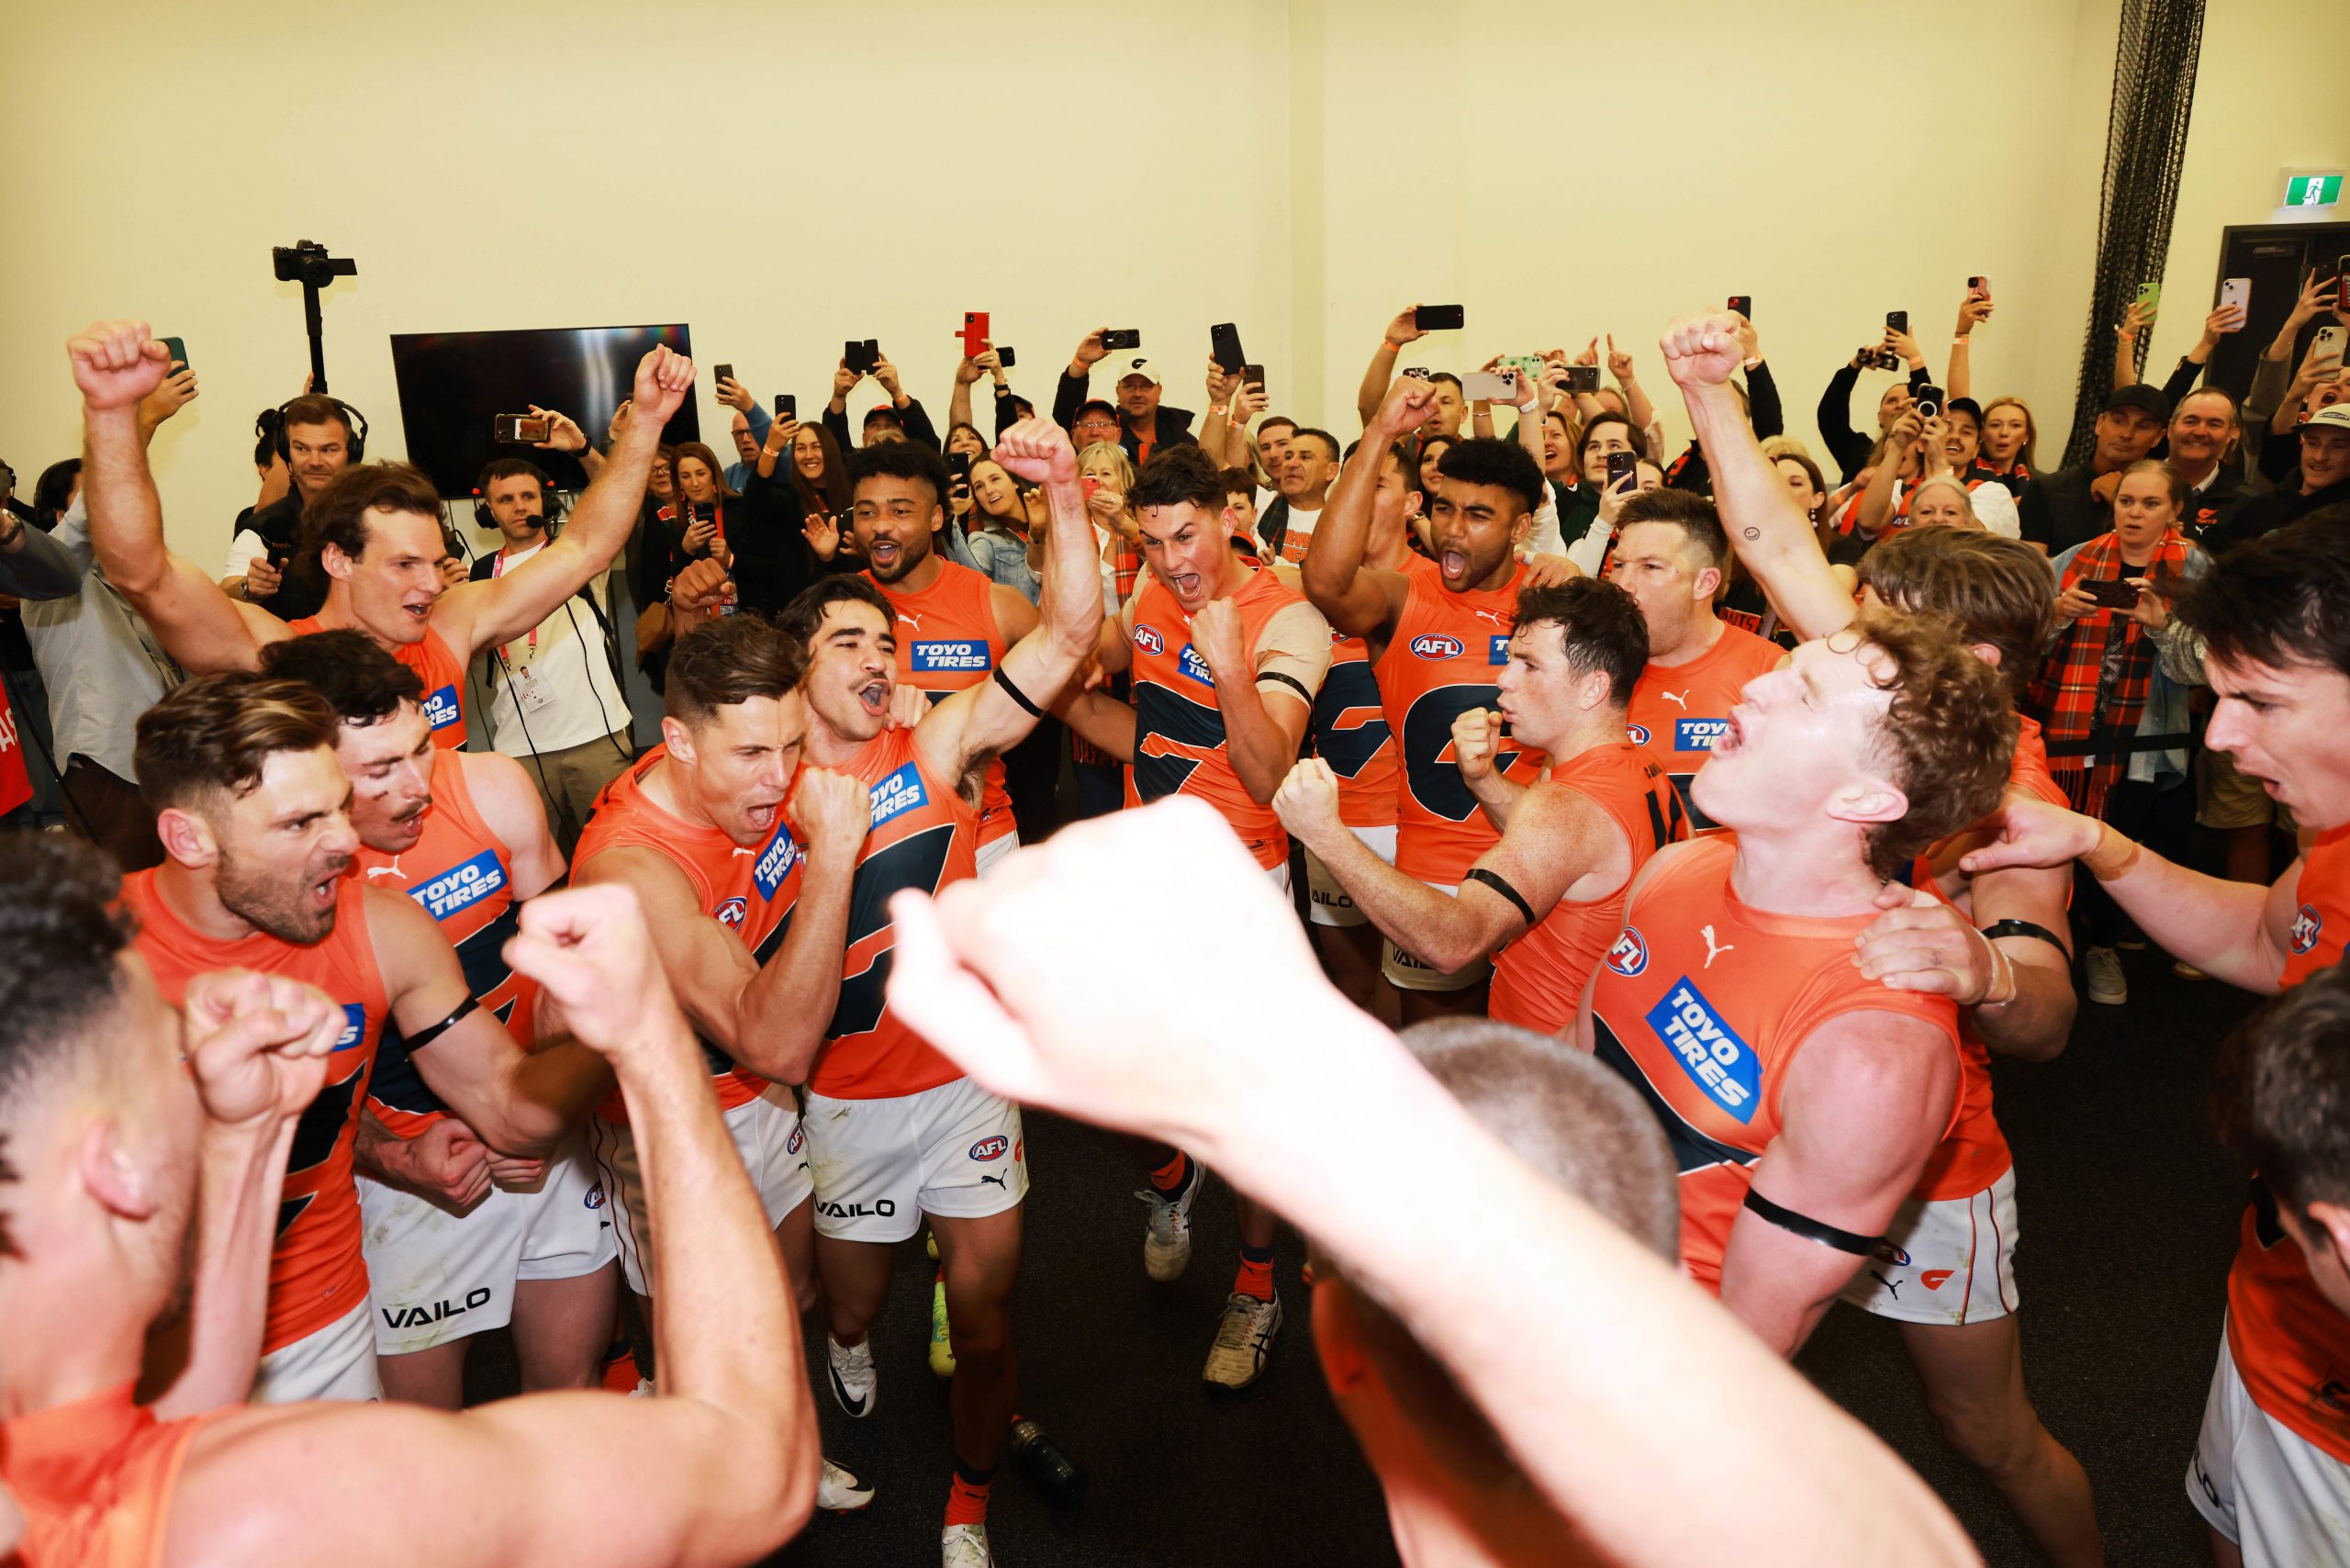 ADELAIDE, AUSTRALIA - SEPTEMBER 16: The Giants celebrate their win during the 2023 AFL Second Semi Final match between the Port Adelaide Power and the GWS GIANTS at Adelaide Oval on September 16, 2023 in Adelaide, Australia. (Photo by James Elsby/AFL Photos via Getty Images)